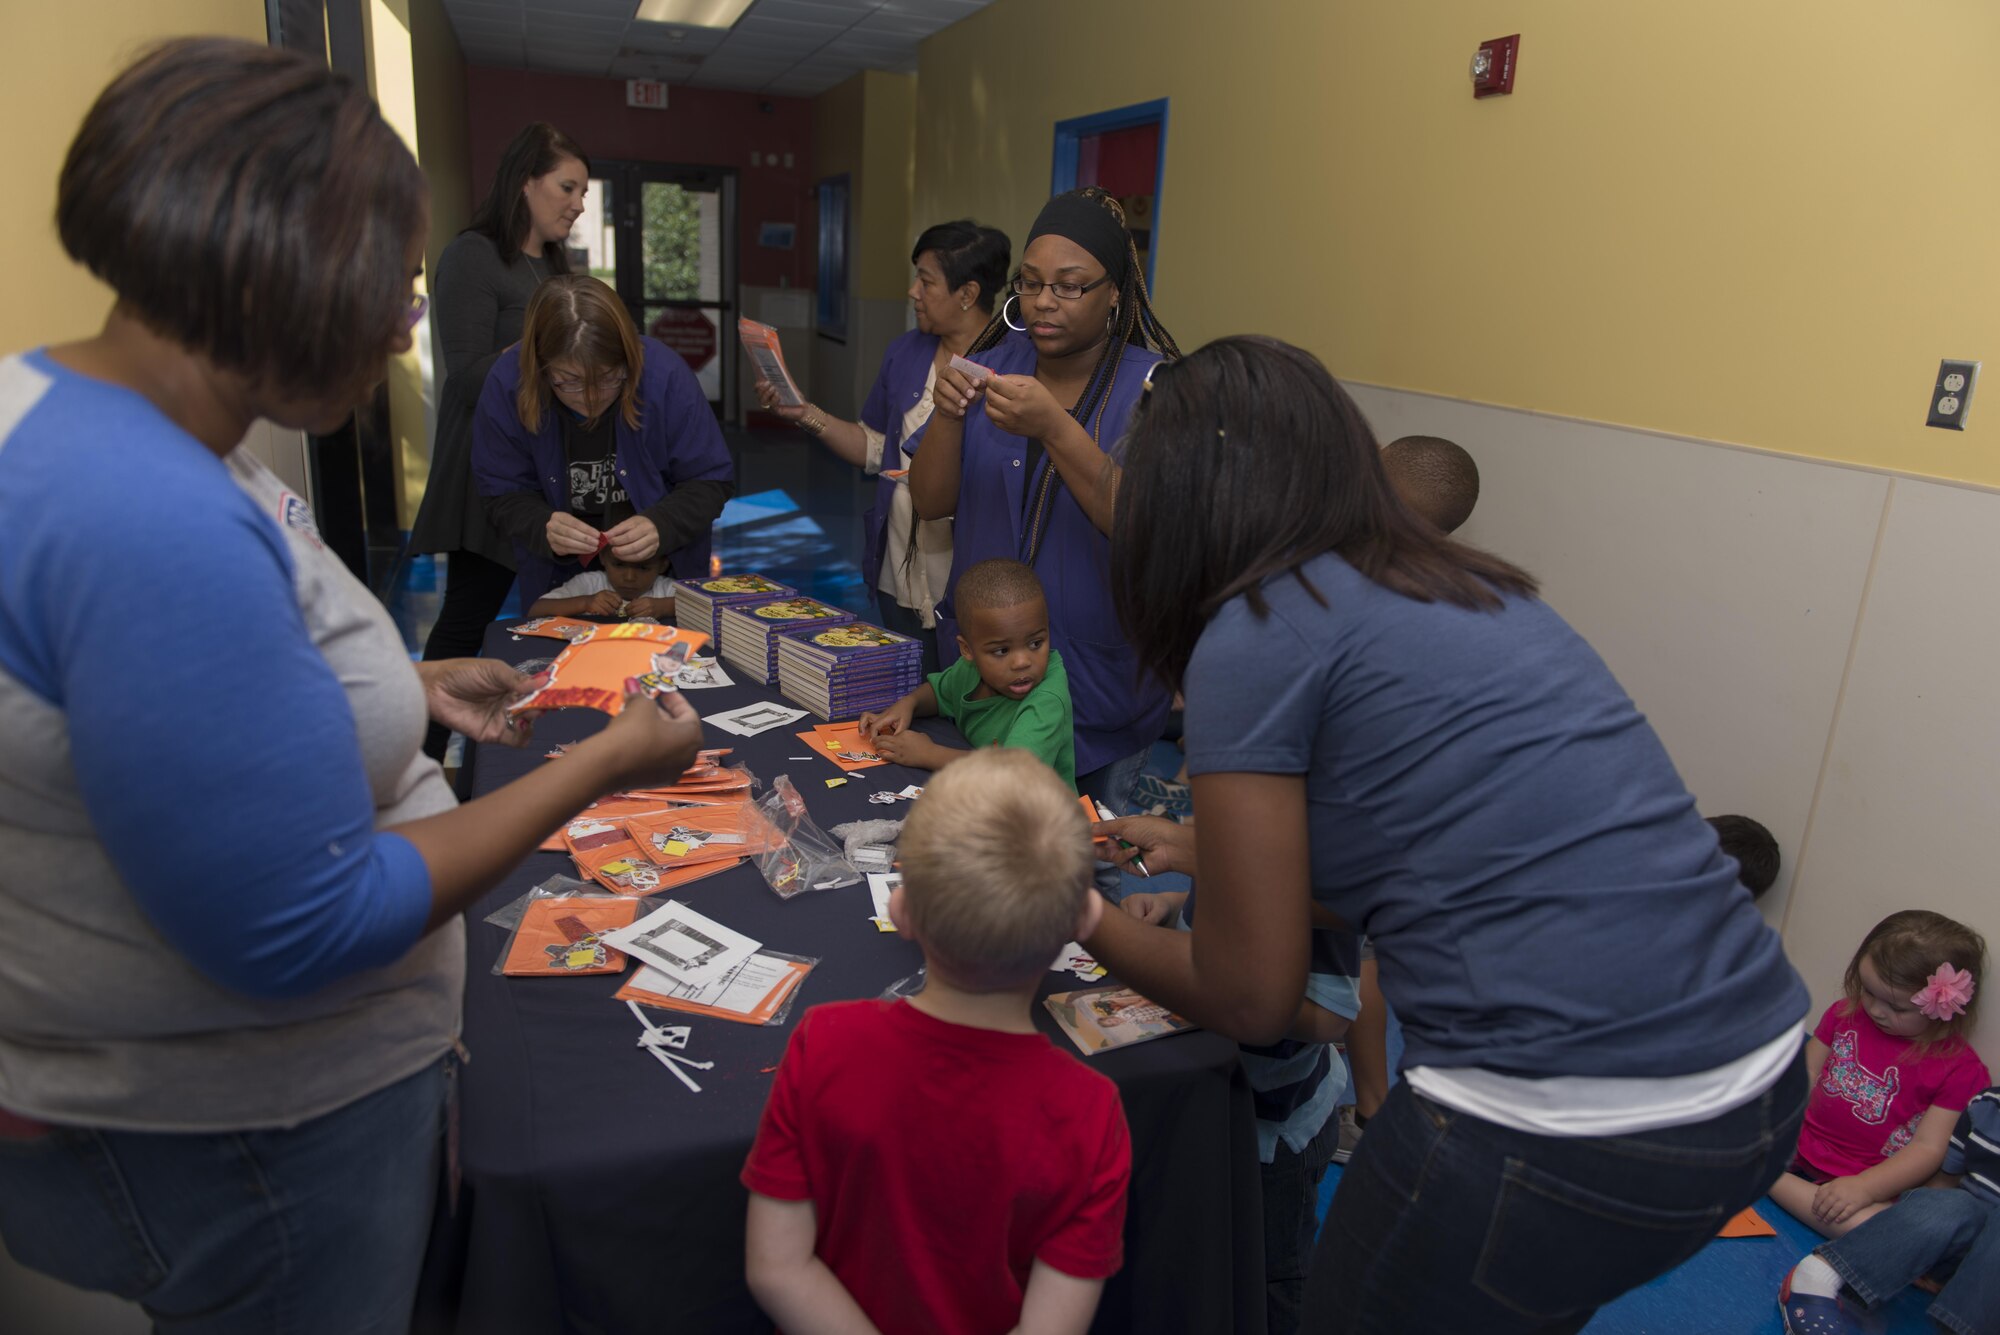 USO and Child Development Center members help children with arts and crafts in the CDC Oct. 12, 2016 on Keesler Air Force Base, Miss. The USO-led event also included a reading of “It’s the Great Pumpkin, Carlie Brown” to commemorate the book’s 50th anniversary. (U.S. Air Force photo by Andre’ Askew/Released)

